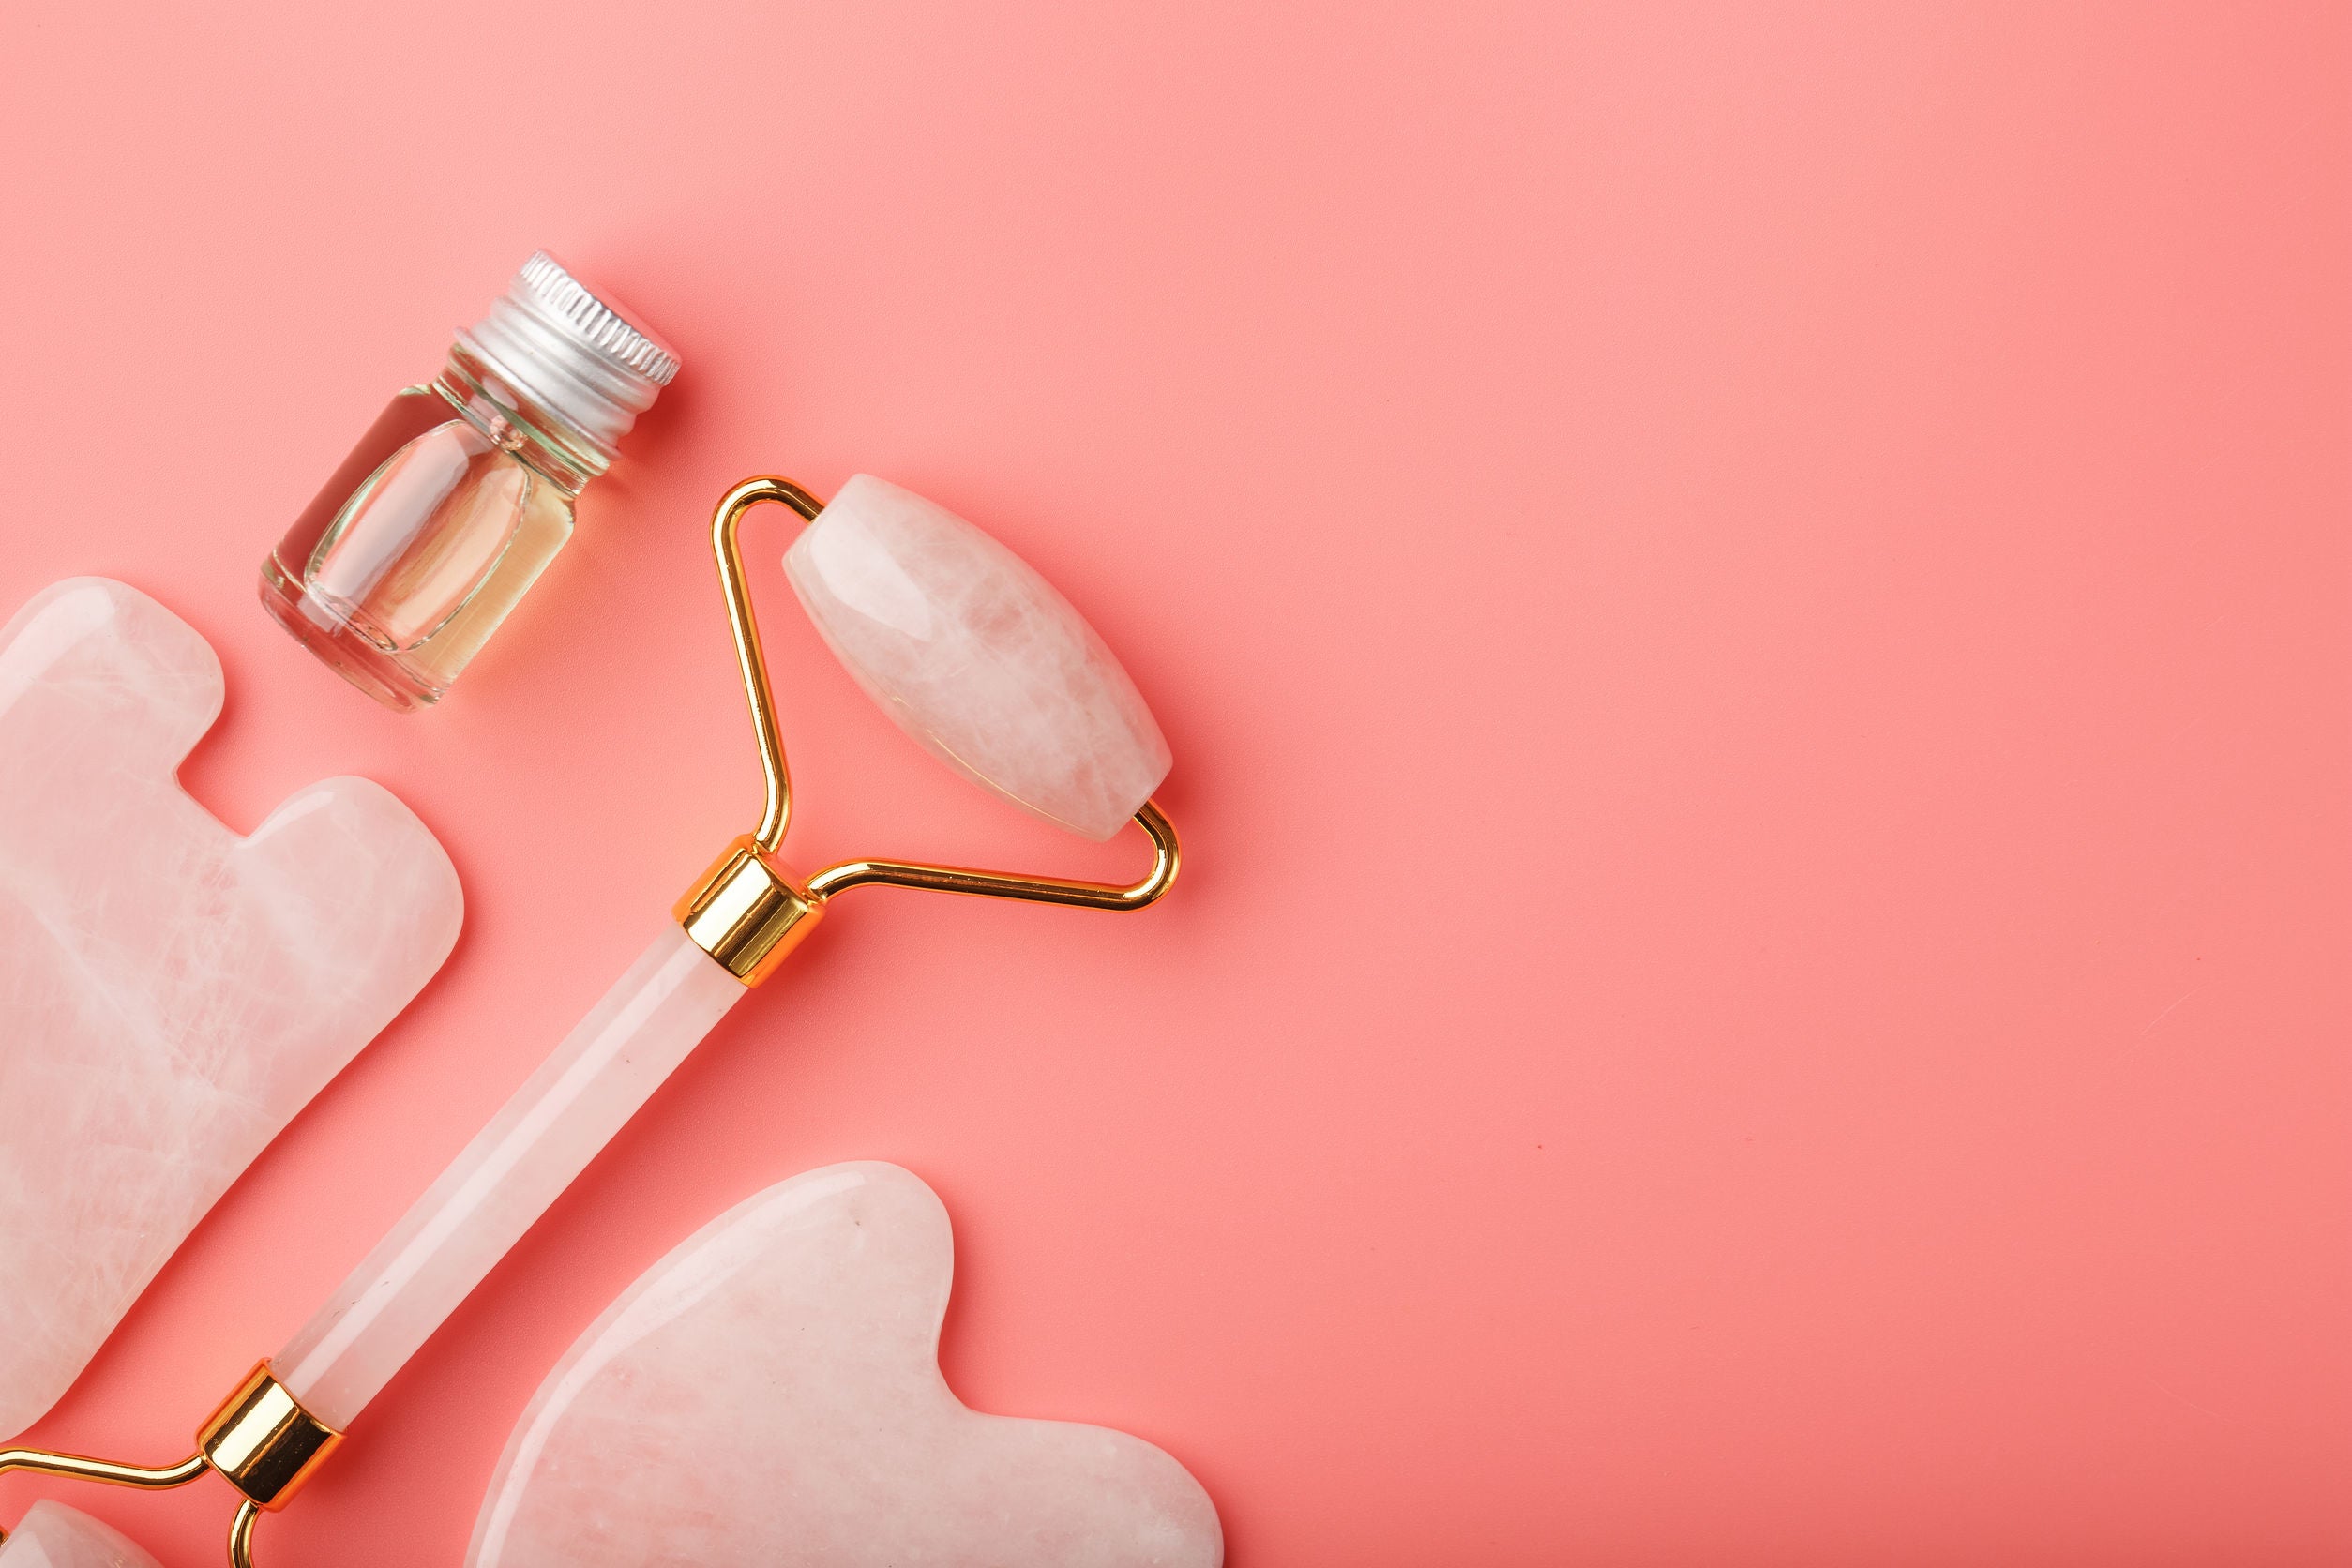 What Are the Differences Between Gua Sha and Facial Rollers